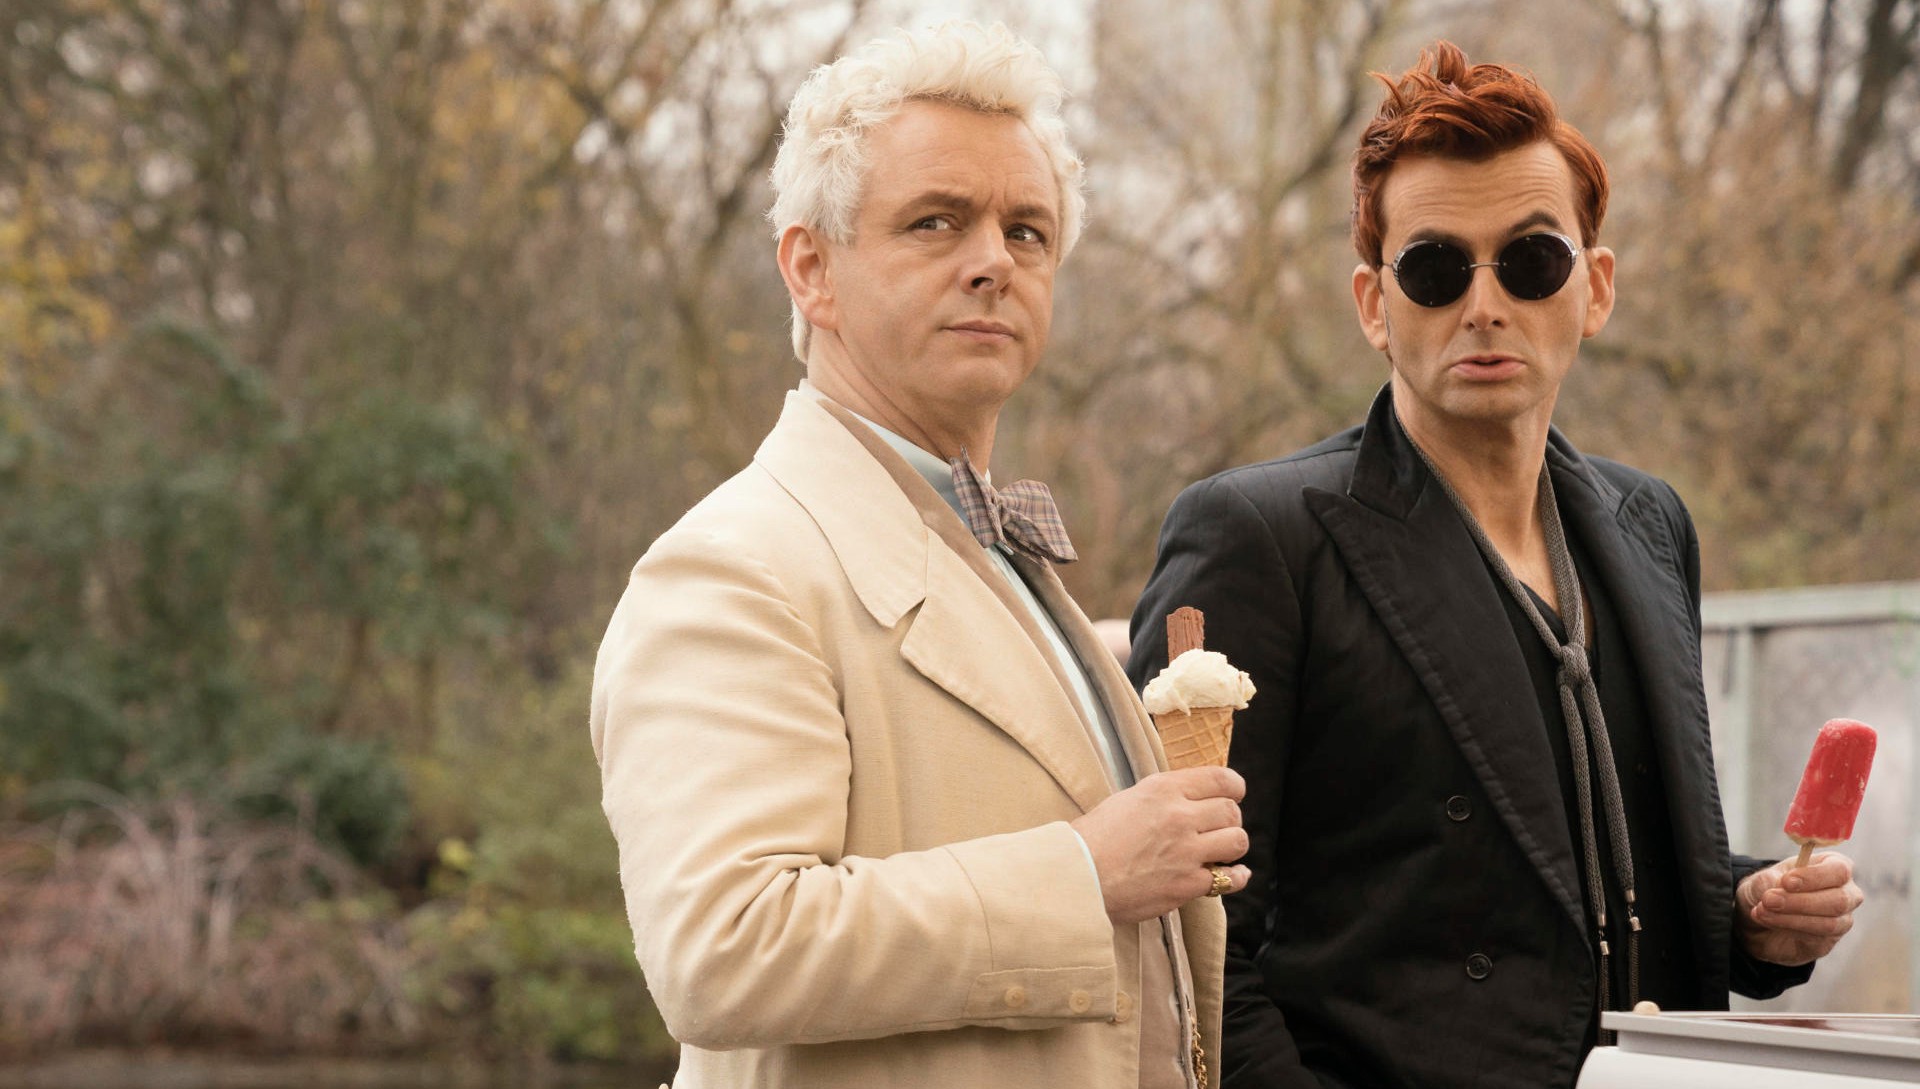 David Tennant and Michael Sheen to Return for Second Season of 'Good Omens'